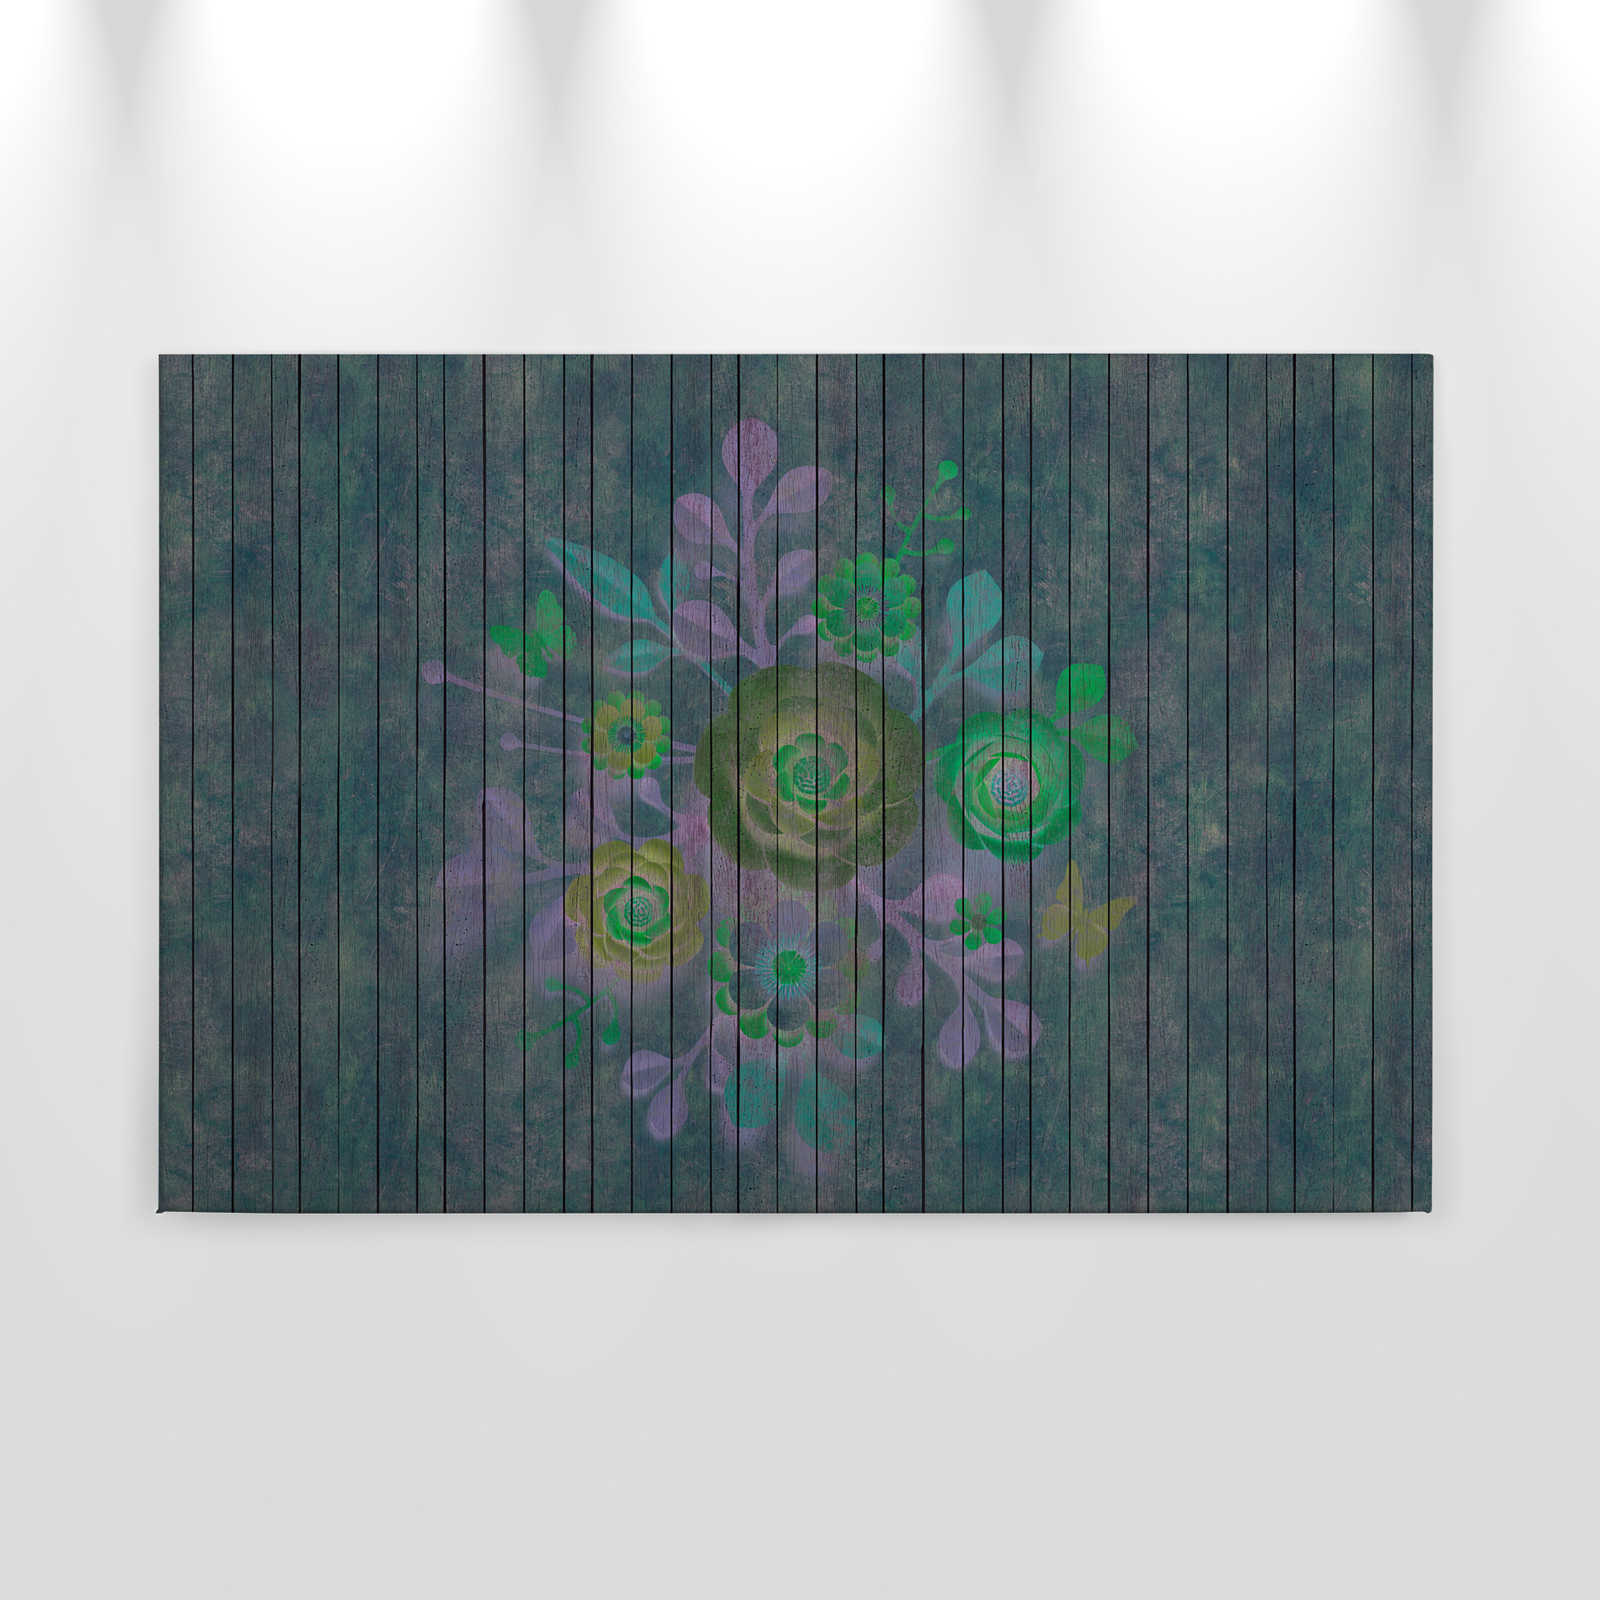             Spray bouquet 2 - Canvas painting in wood panel structure with flowers on board wall - 0.90 m x 0.60 m
        